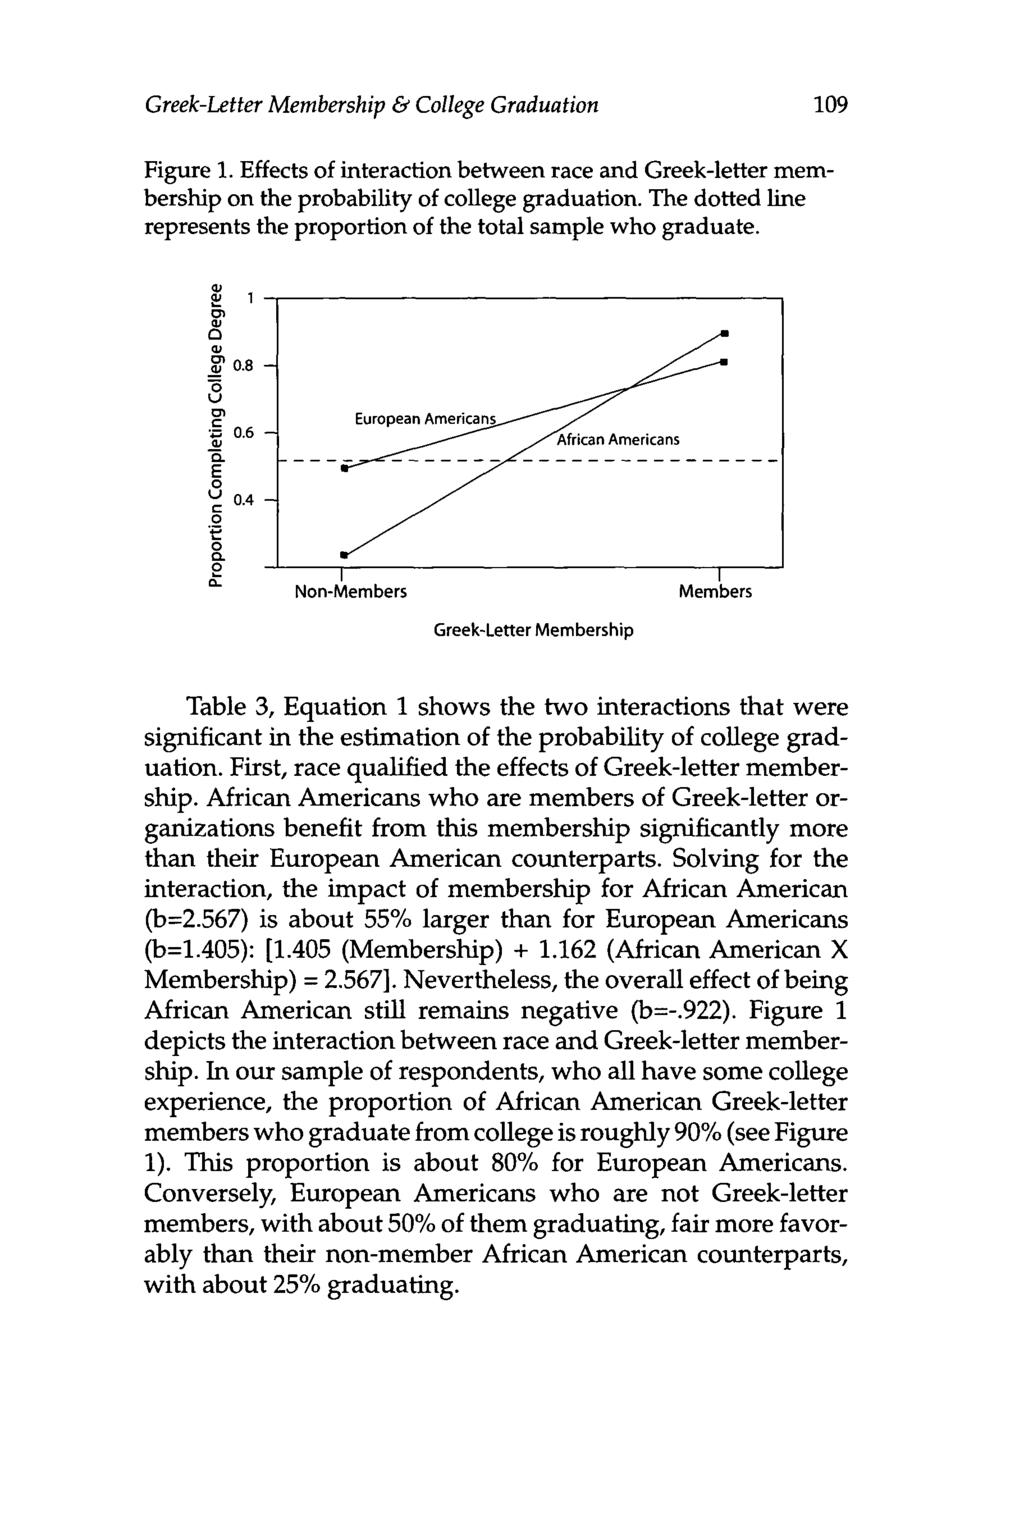 Greek-Letter Membership & College Graduation Figure 1. Effects of interaction between race and Greek-letter membership on the probability of college graduation.